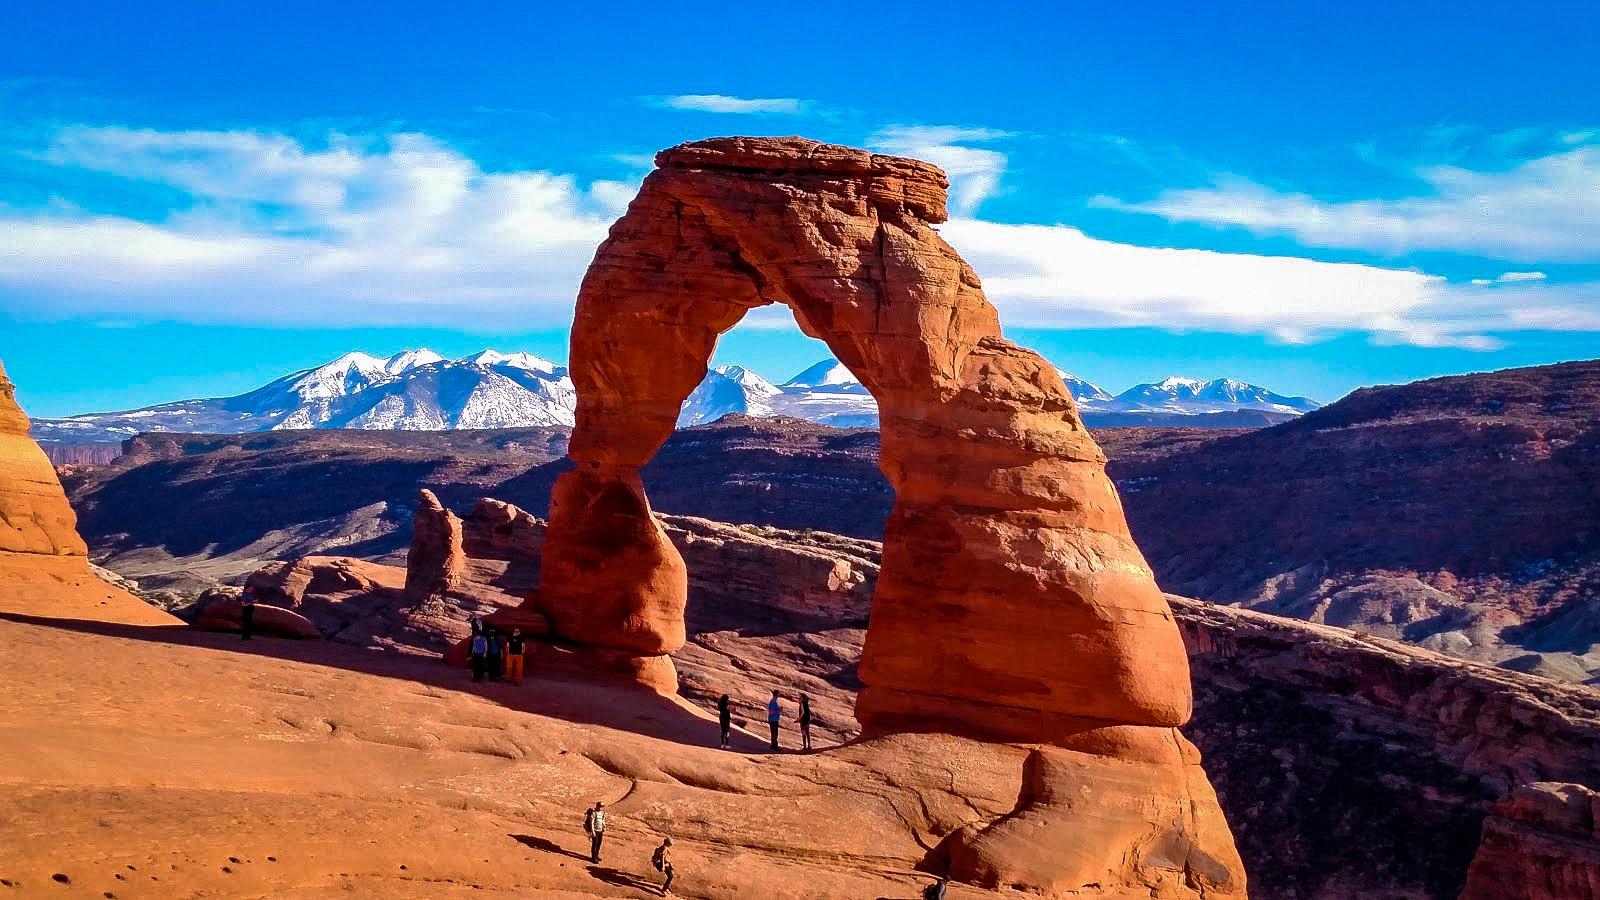 Reasons Why Arches National Park Will Blow Your Mind